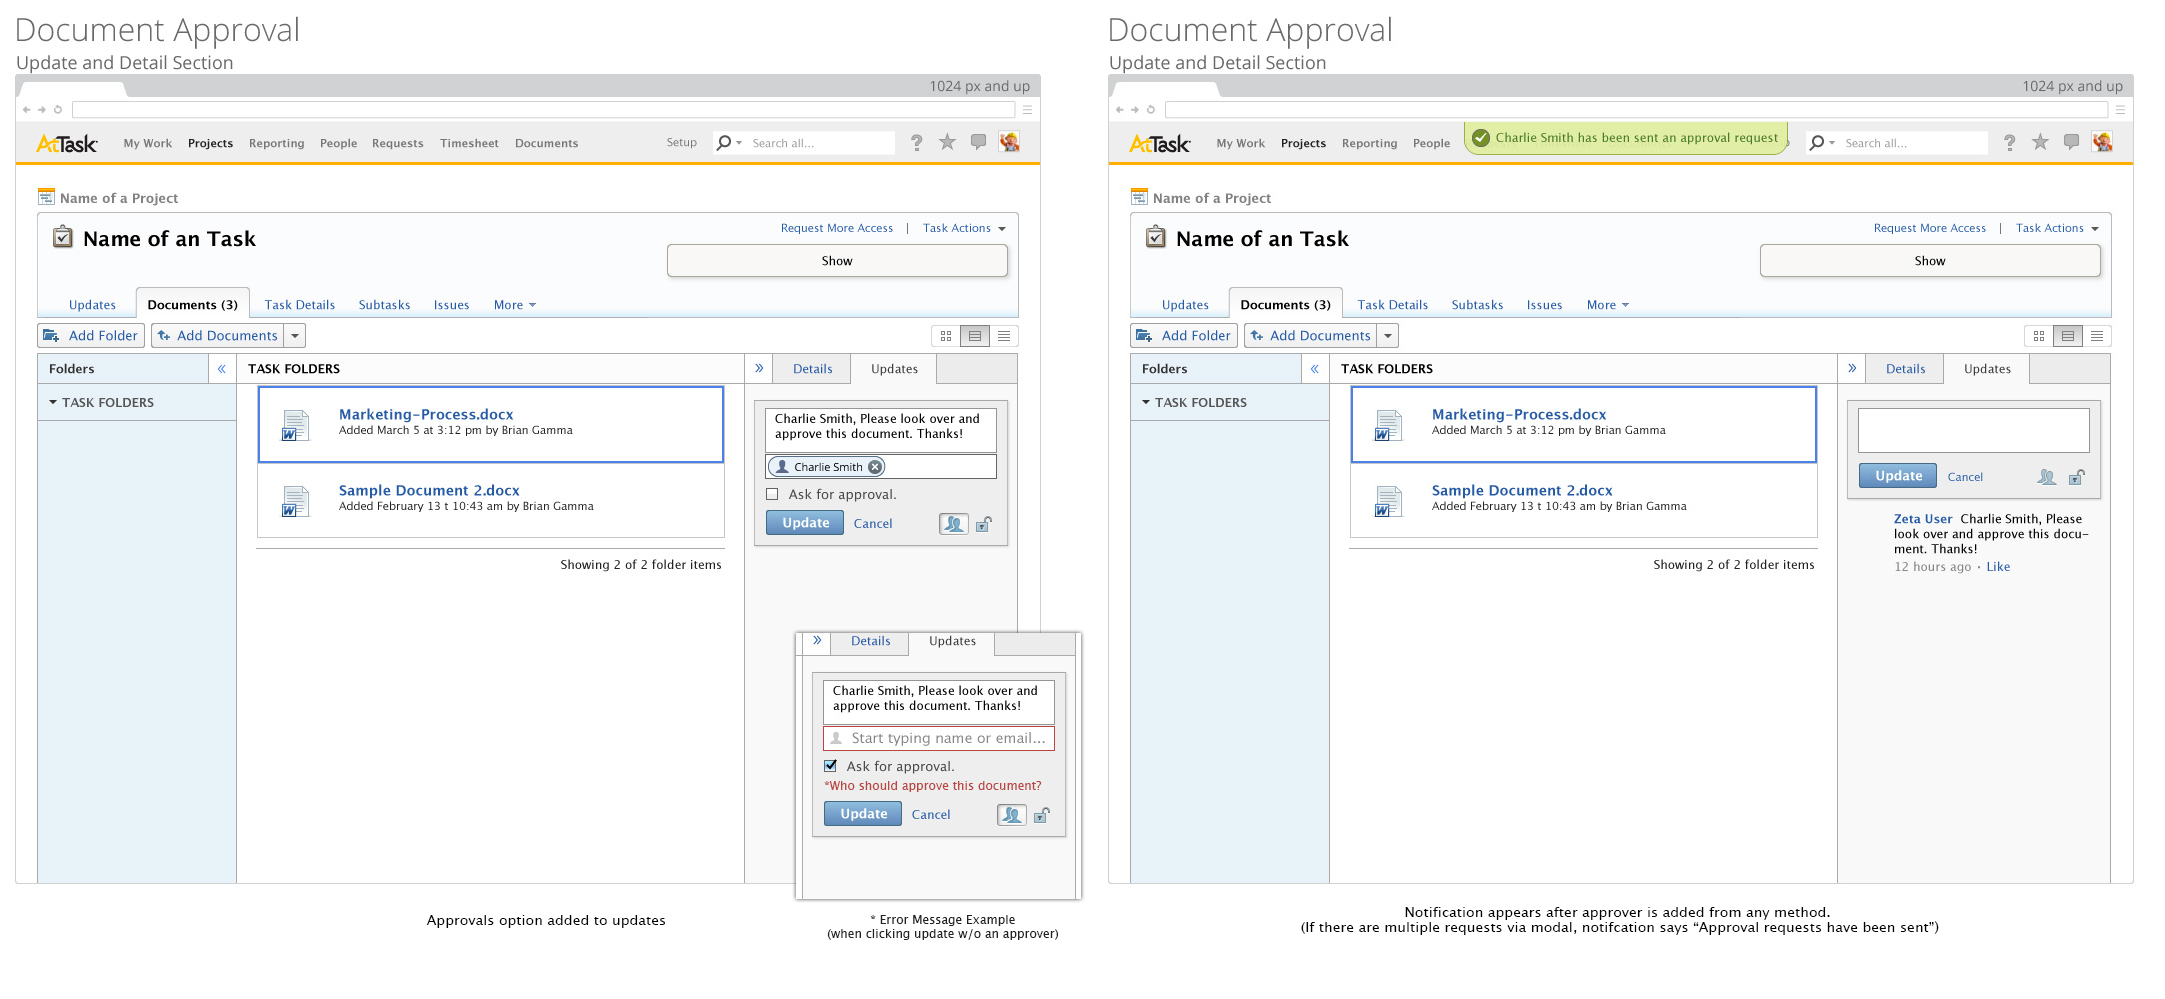 comments-approvals-workflow